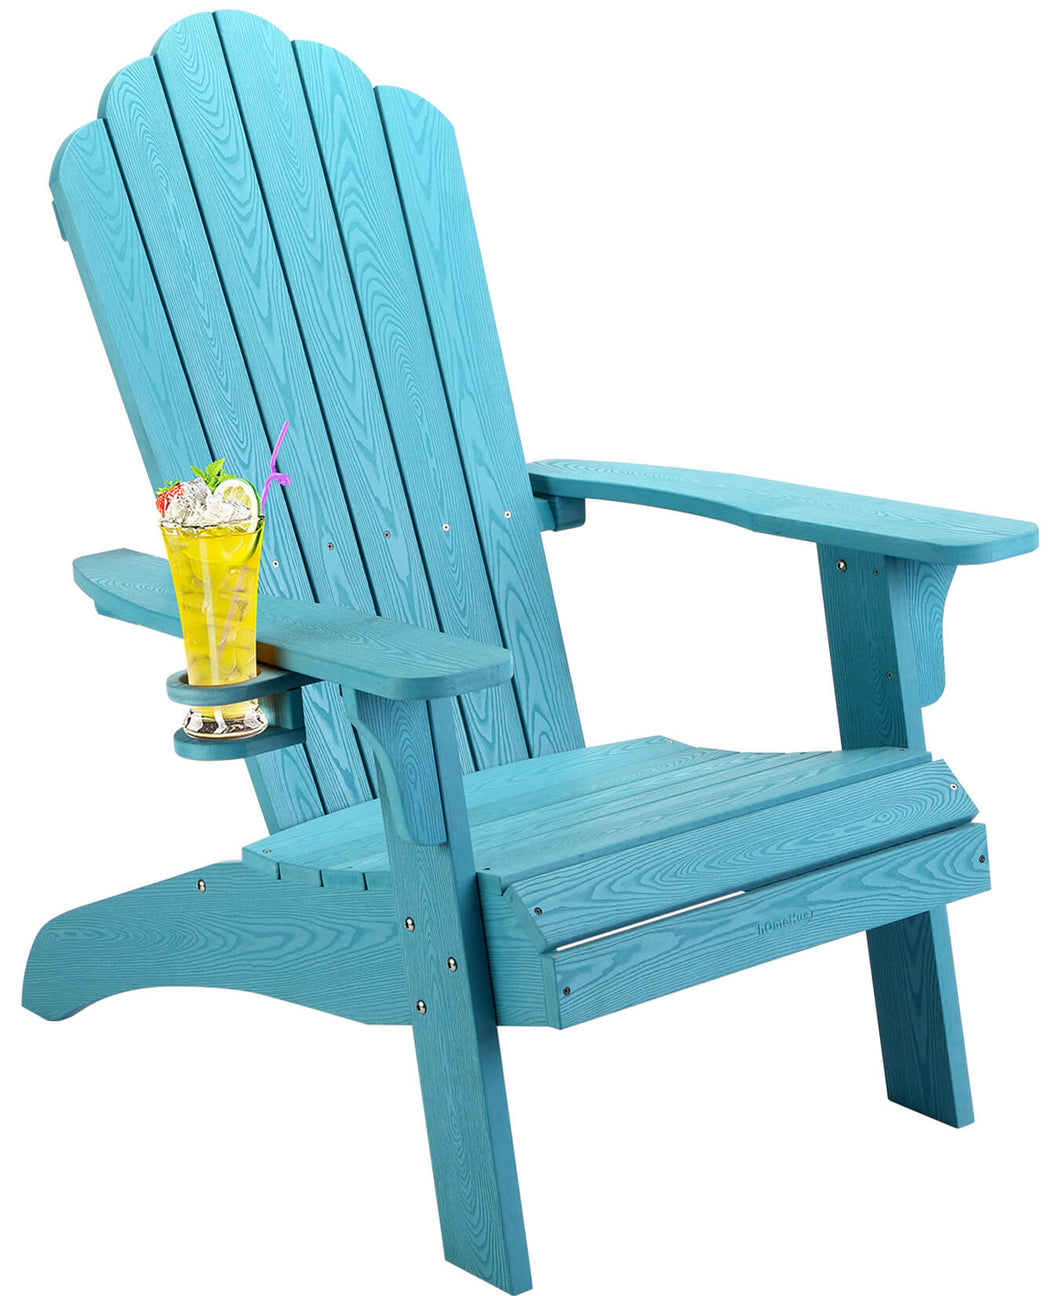 Oversized Adirondack Chair Weather Resistant with Cup Holder - Lake Blue